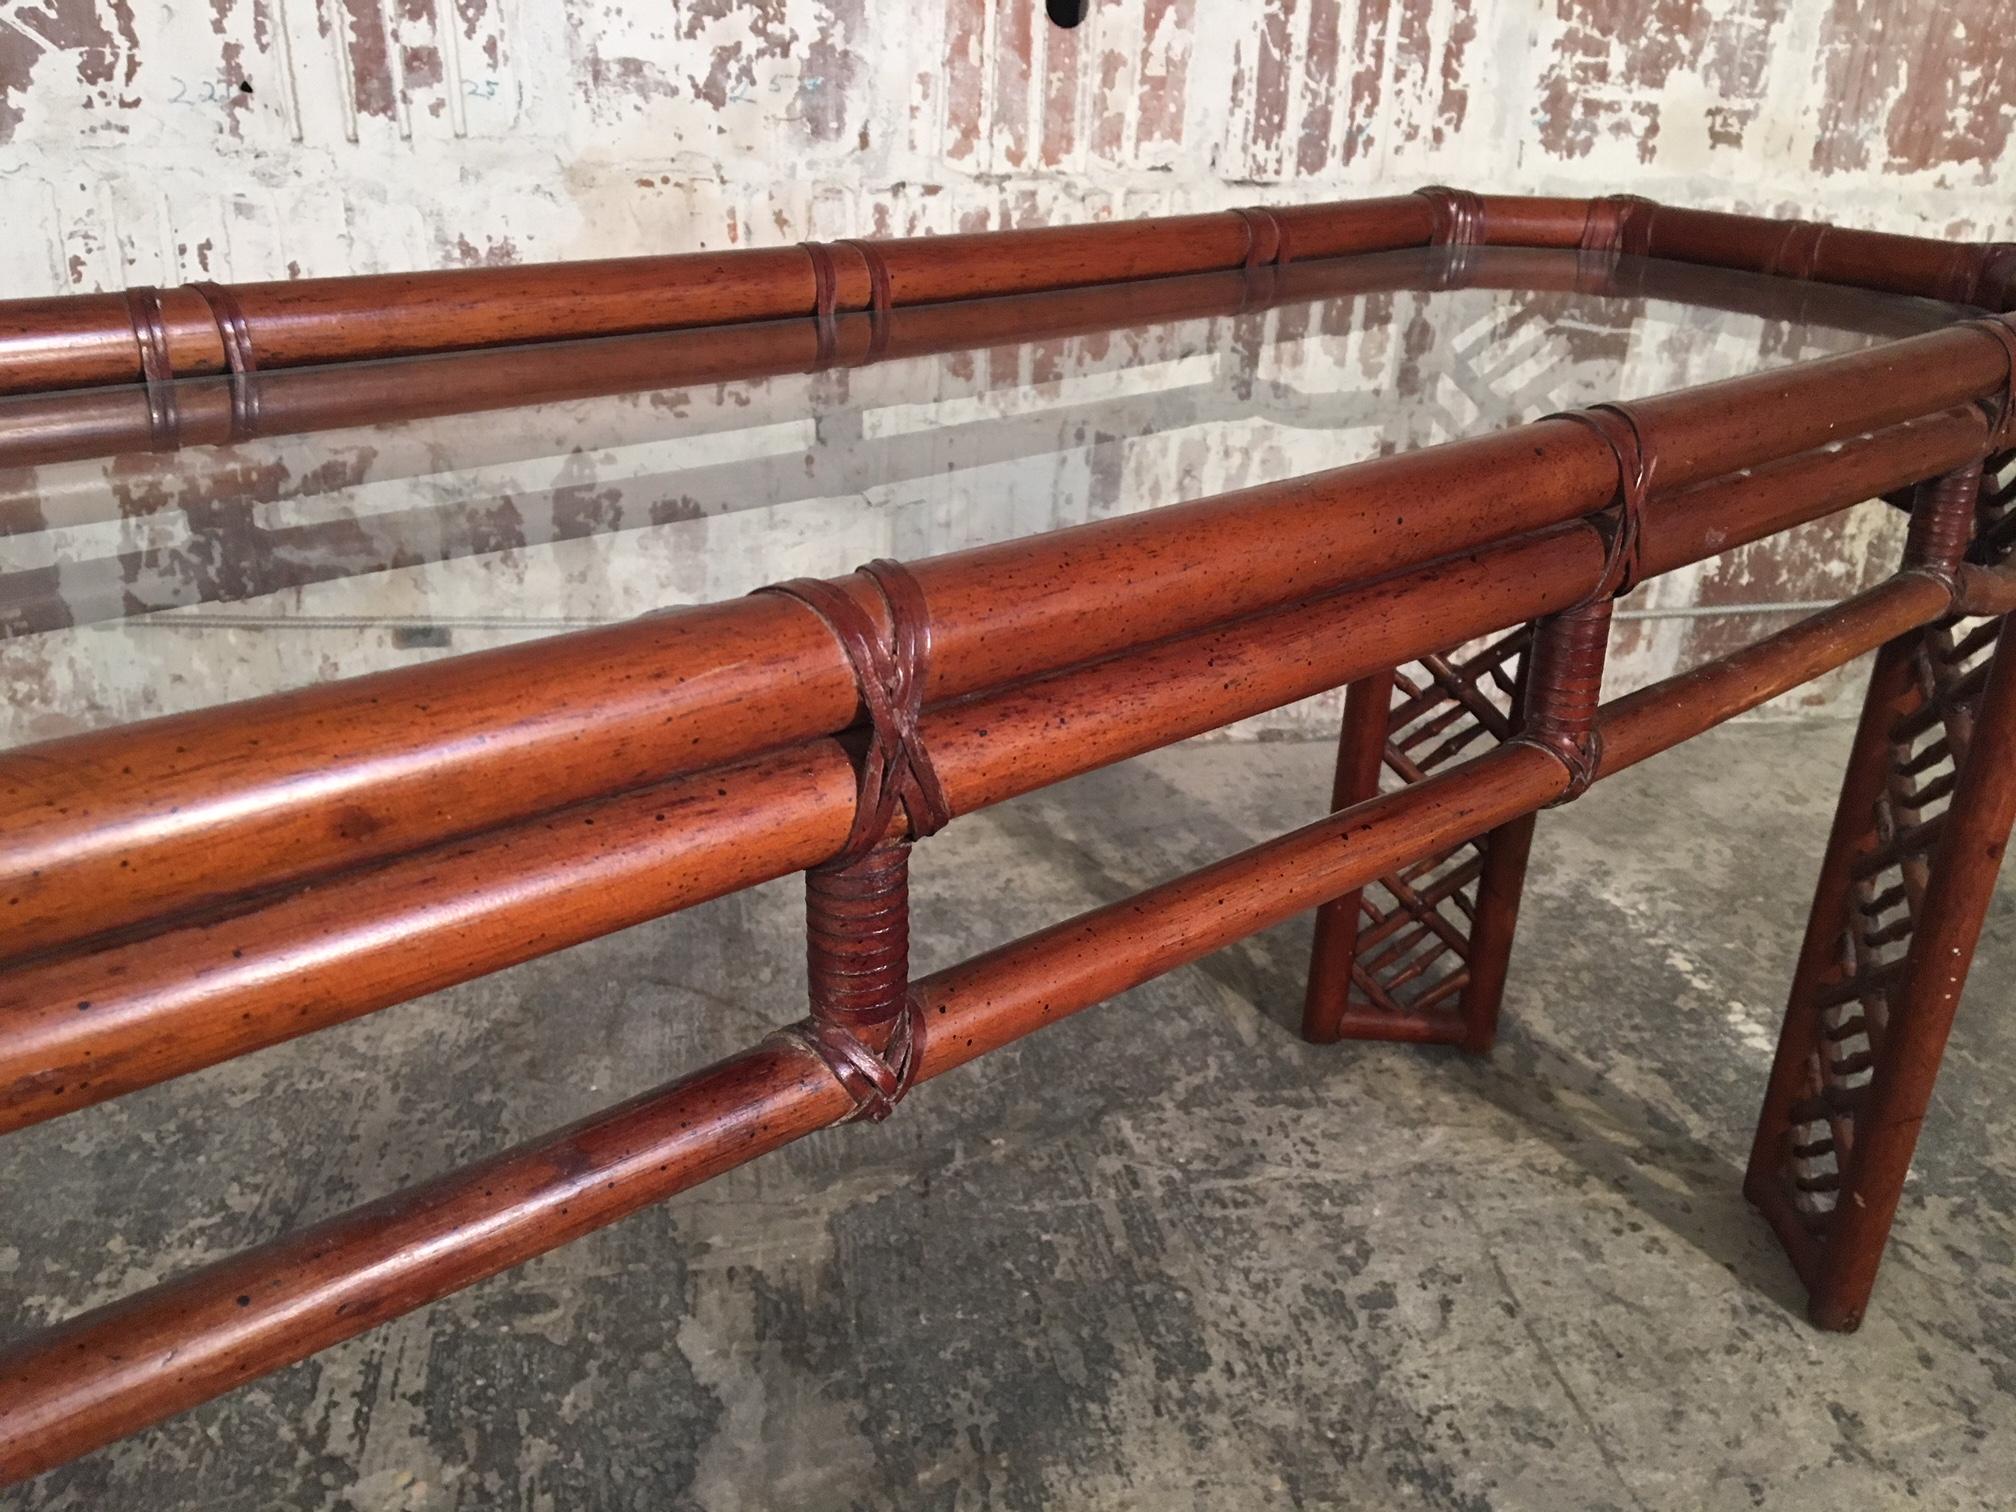 Bamboo console table features Chinese Chippendale detailing and recessed glass top. Perfect touch of chinoiserie styling for any decor. Excellent vintage condition with minor signs of age appropriate wear.